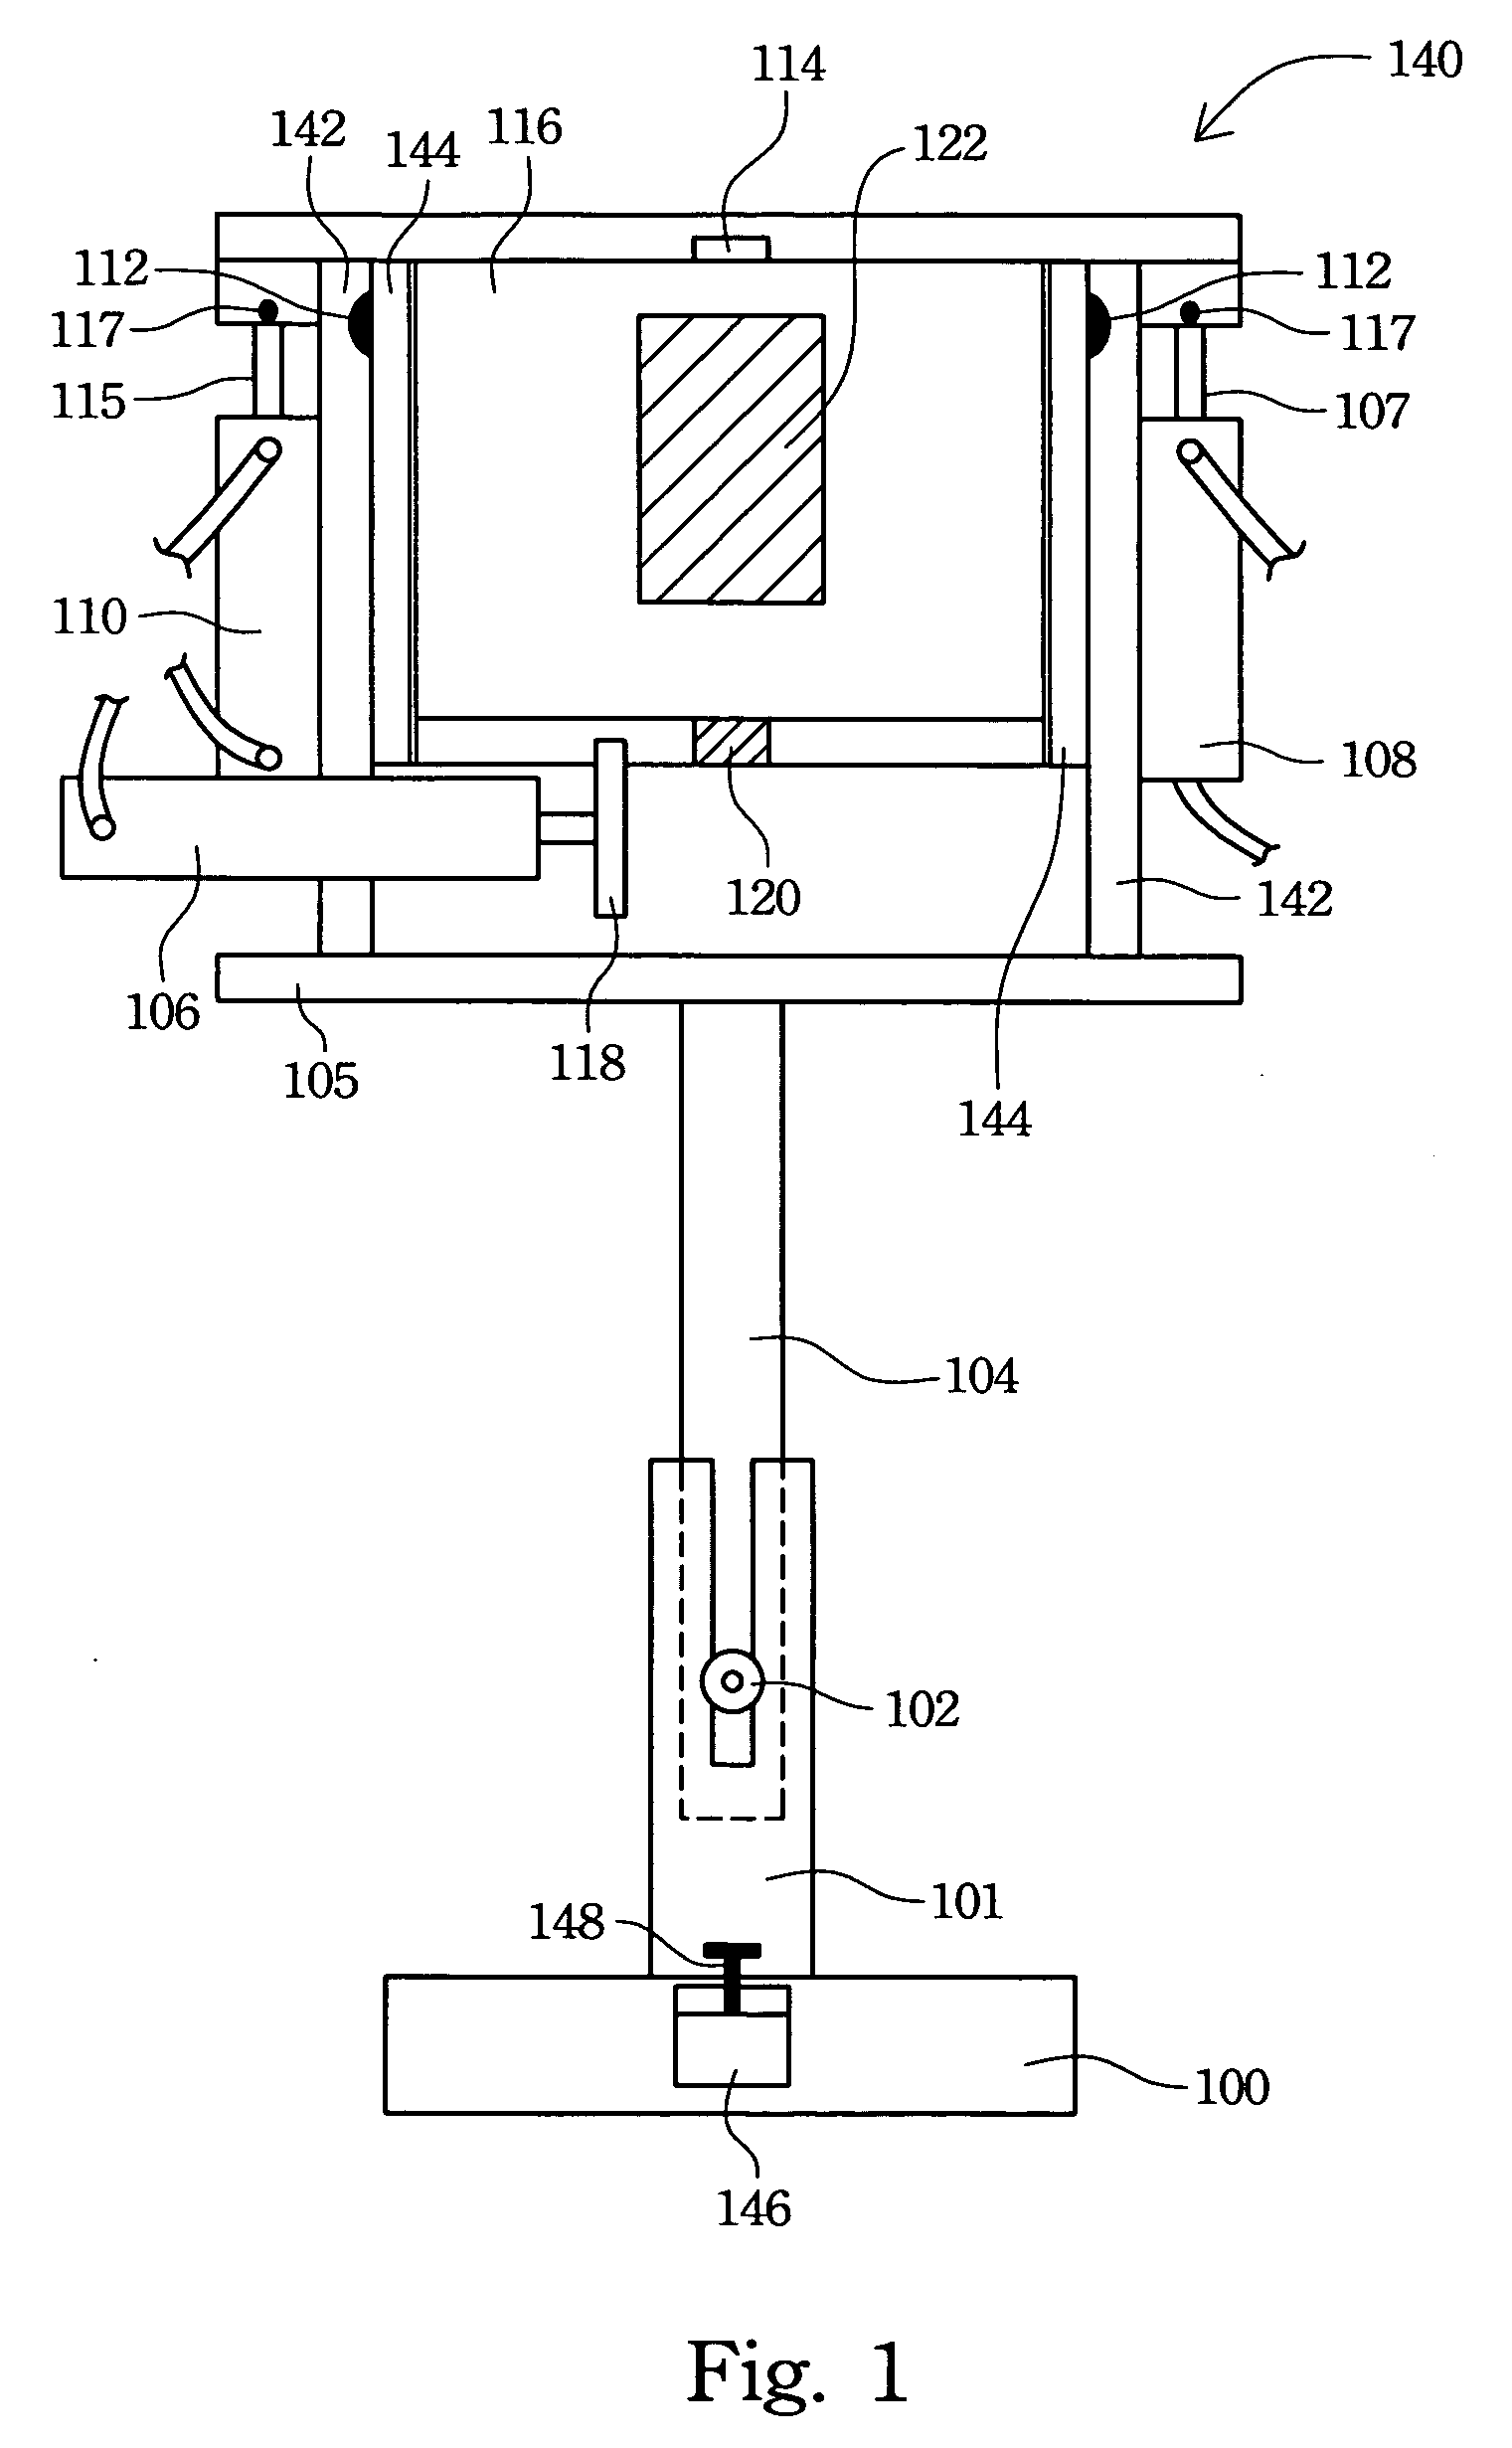 Mobile phone positioning apparatus for radiation testing